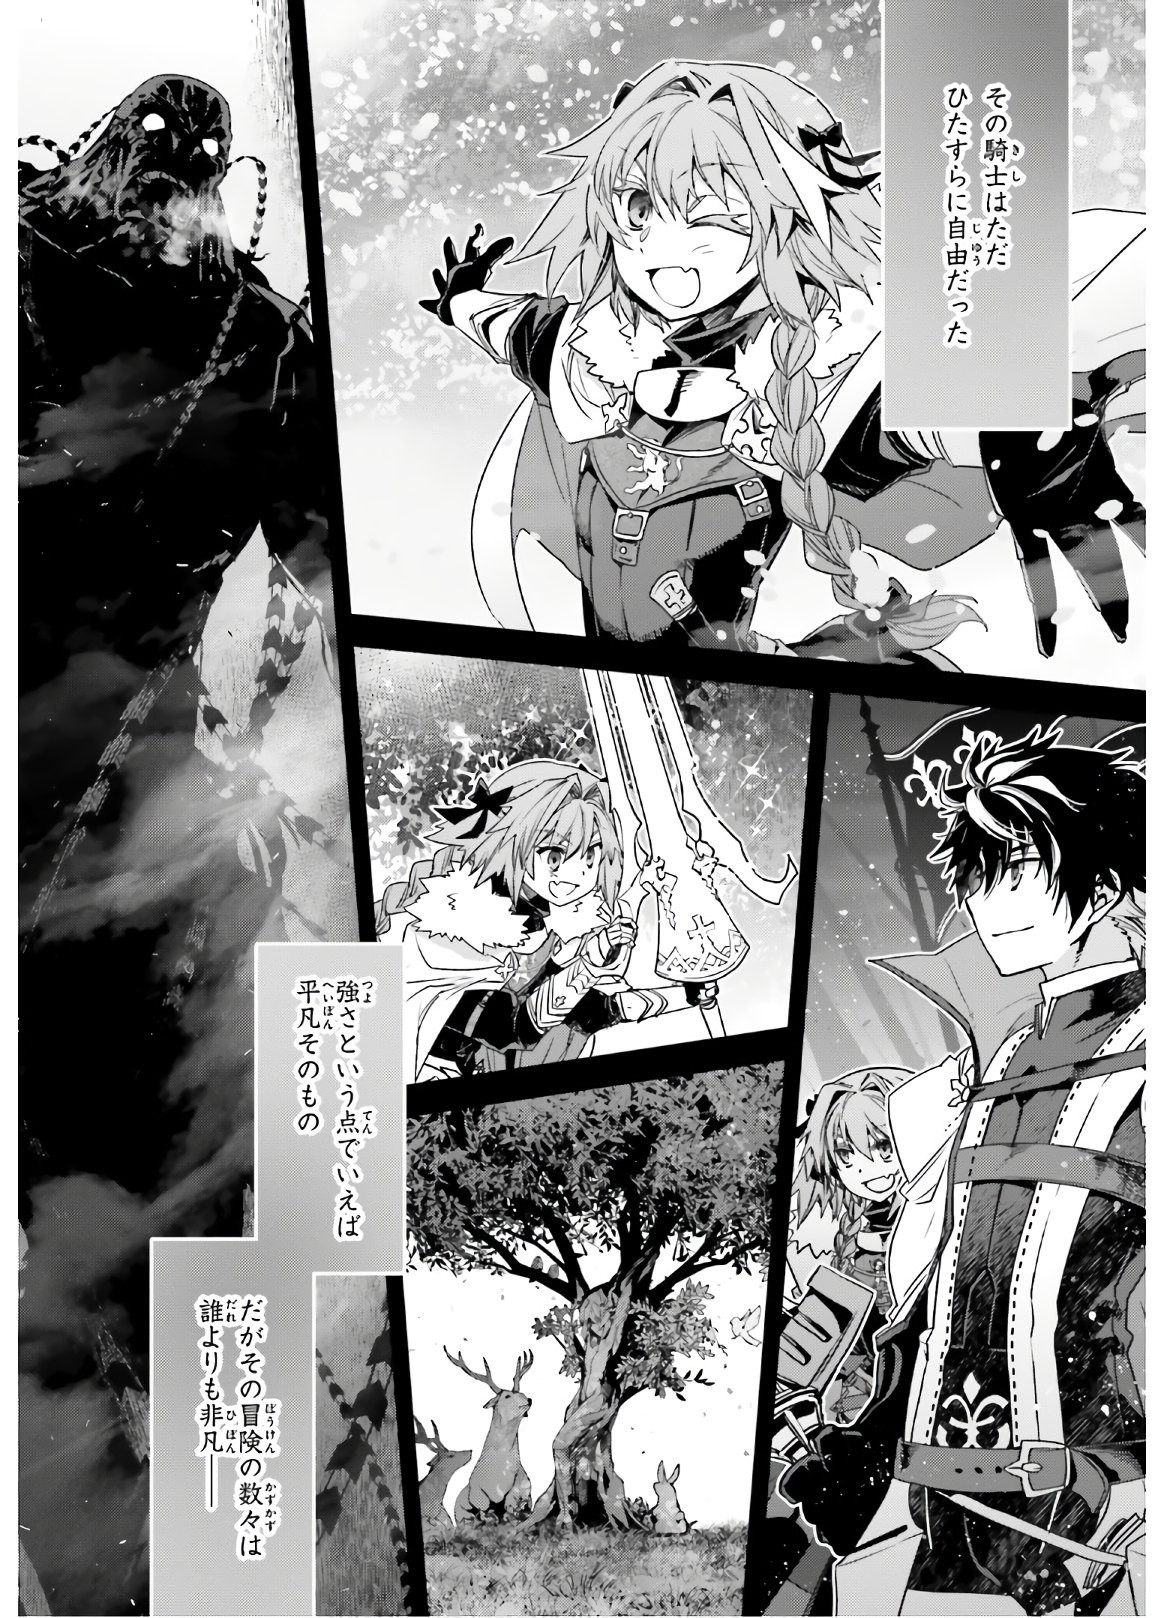 Fate-Apocrypha - Chapter 42-2 - Page 4